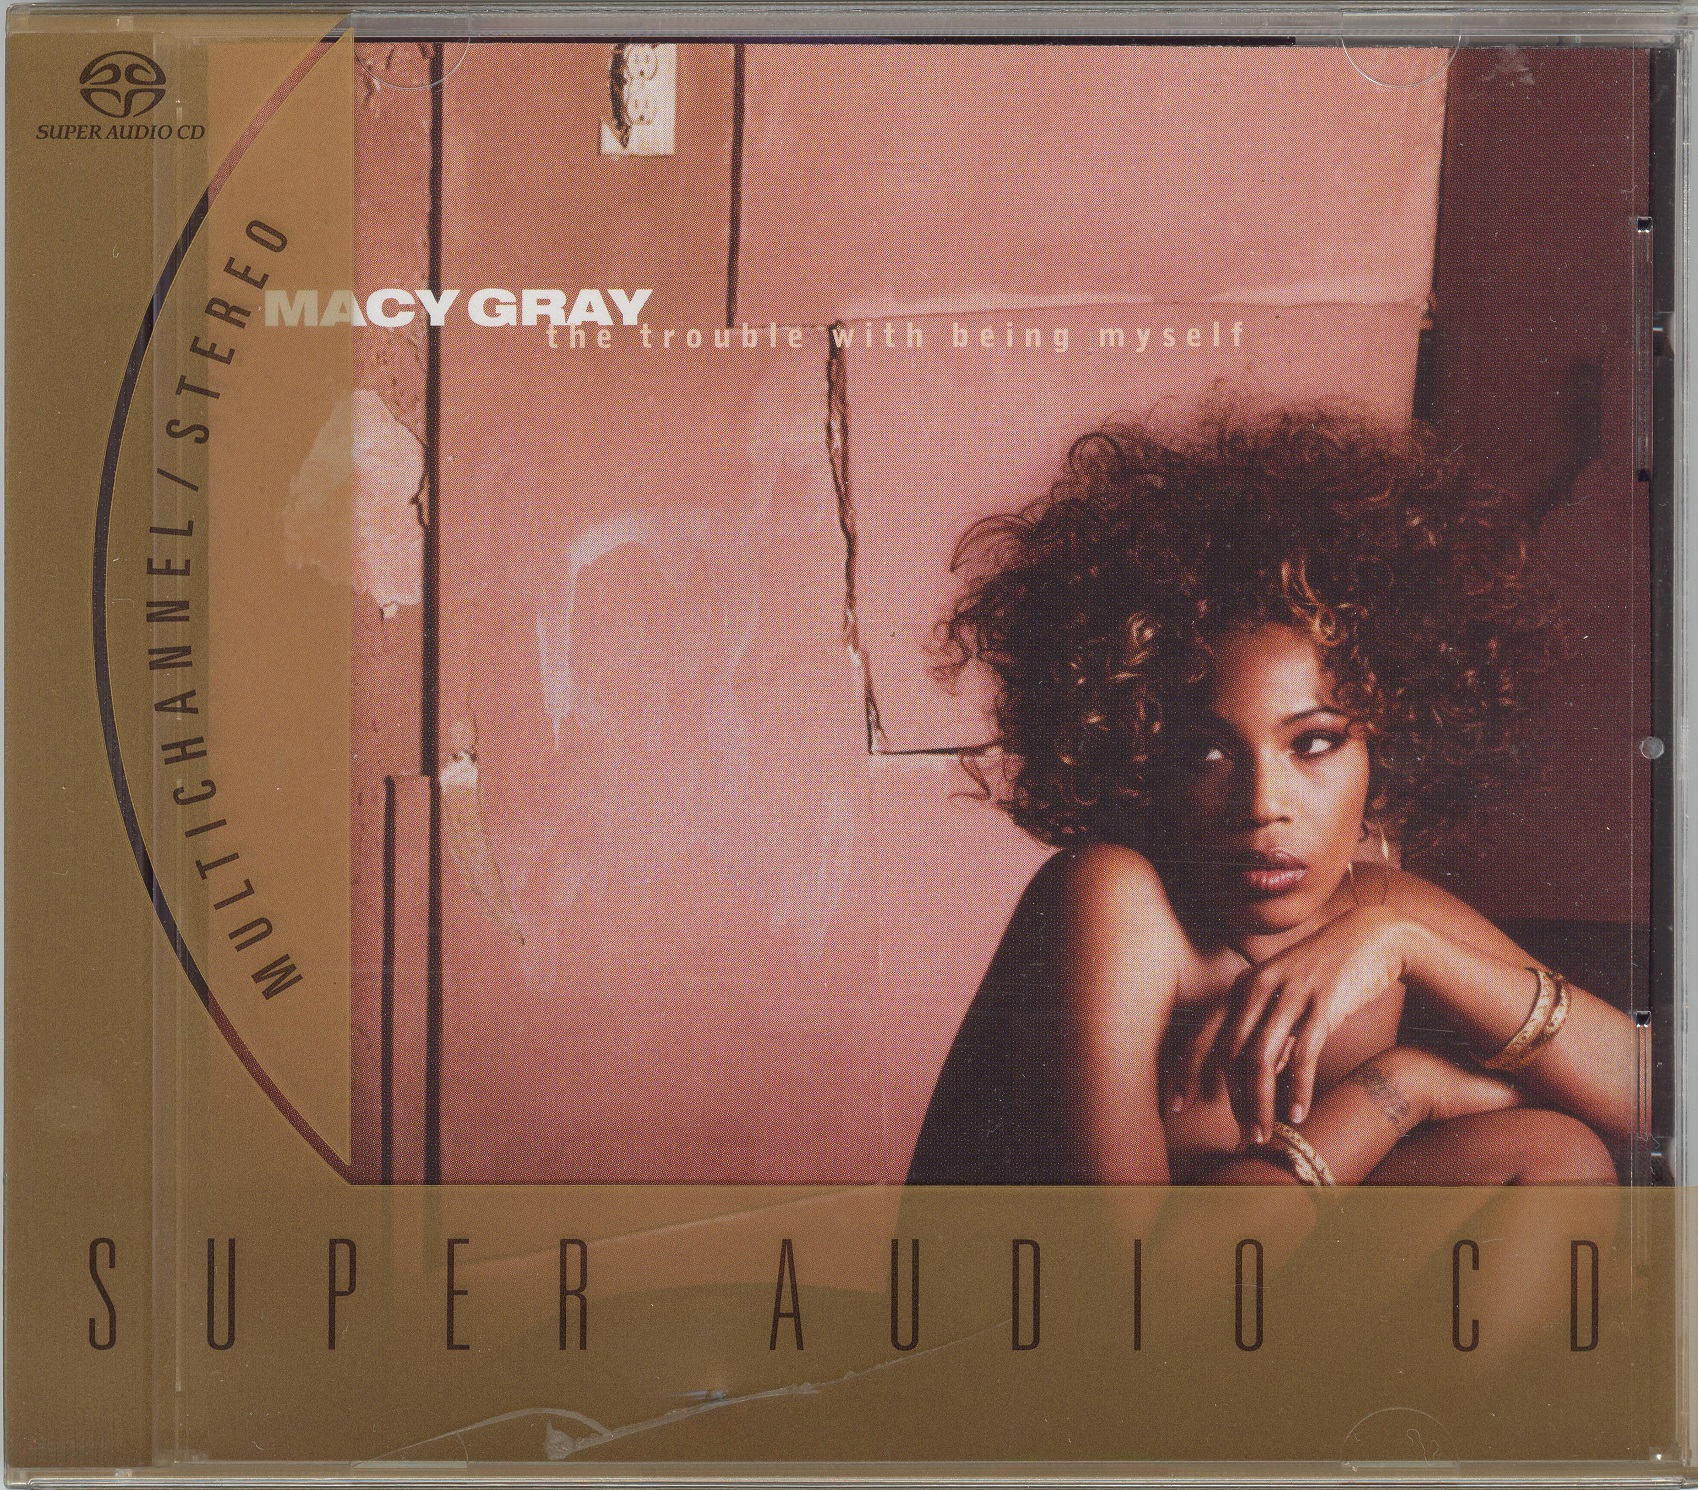 Macy Gray - The Trouble With Being Myself (2003) MCH SACD ISO